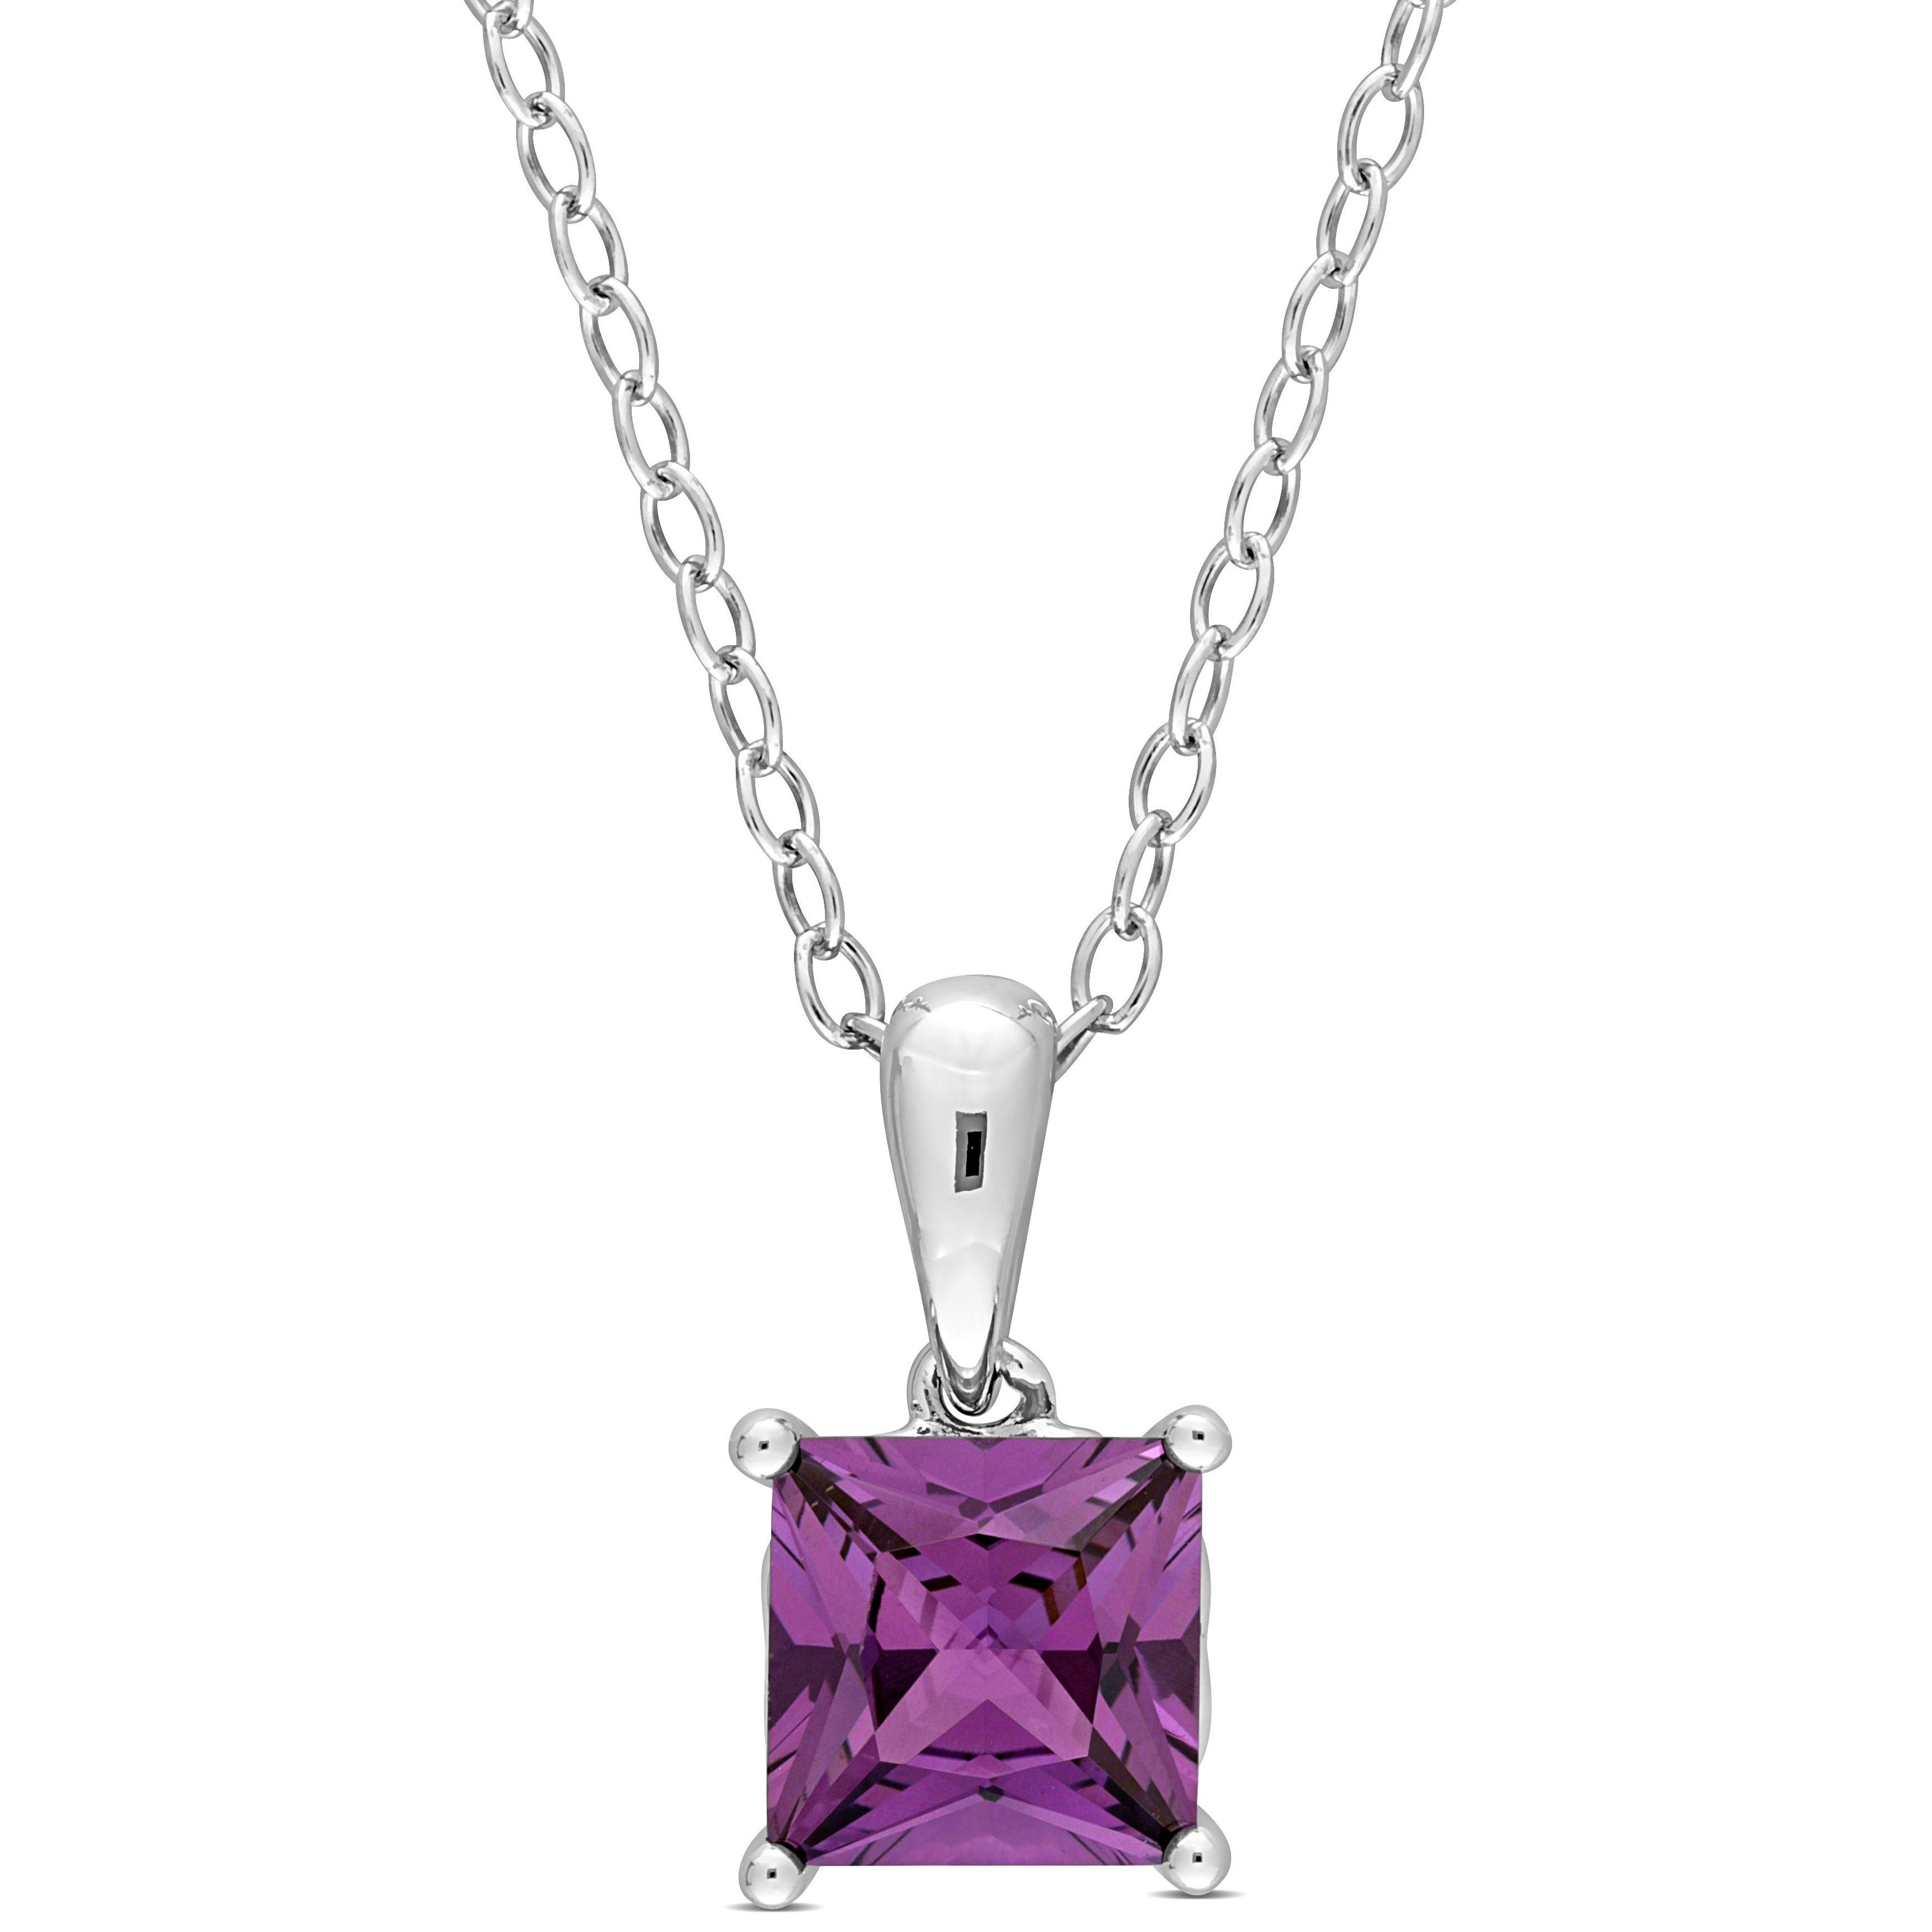 1 CT TGW Princess Cut Simulated Alexandrite Solitaire Heart Design Pendant with Chain in Sterling Silver - 18 in.